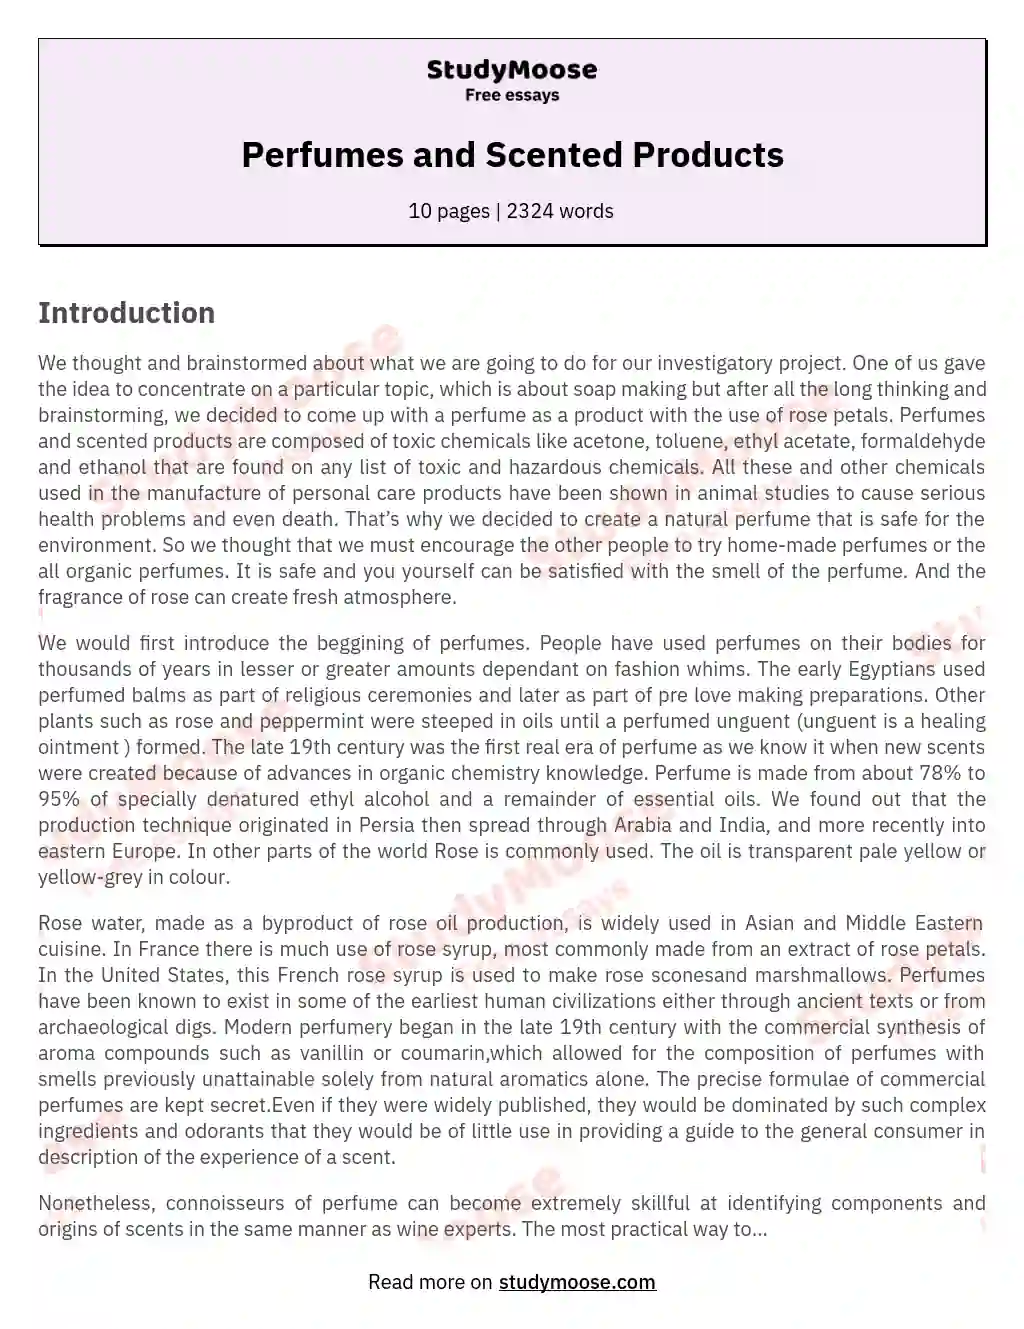 Perfumes and Scented Products essay